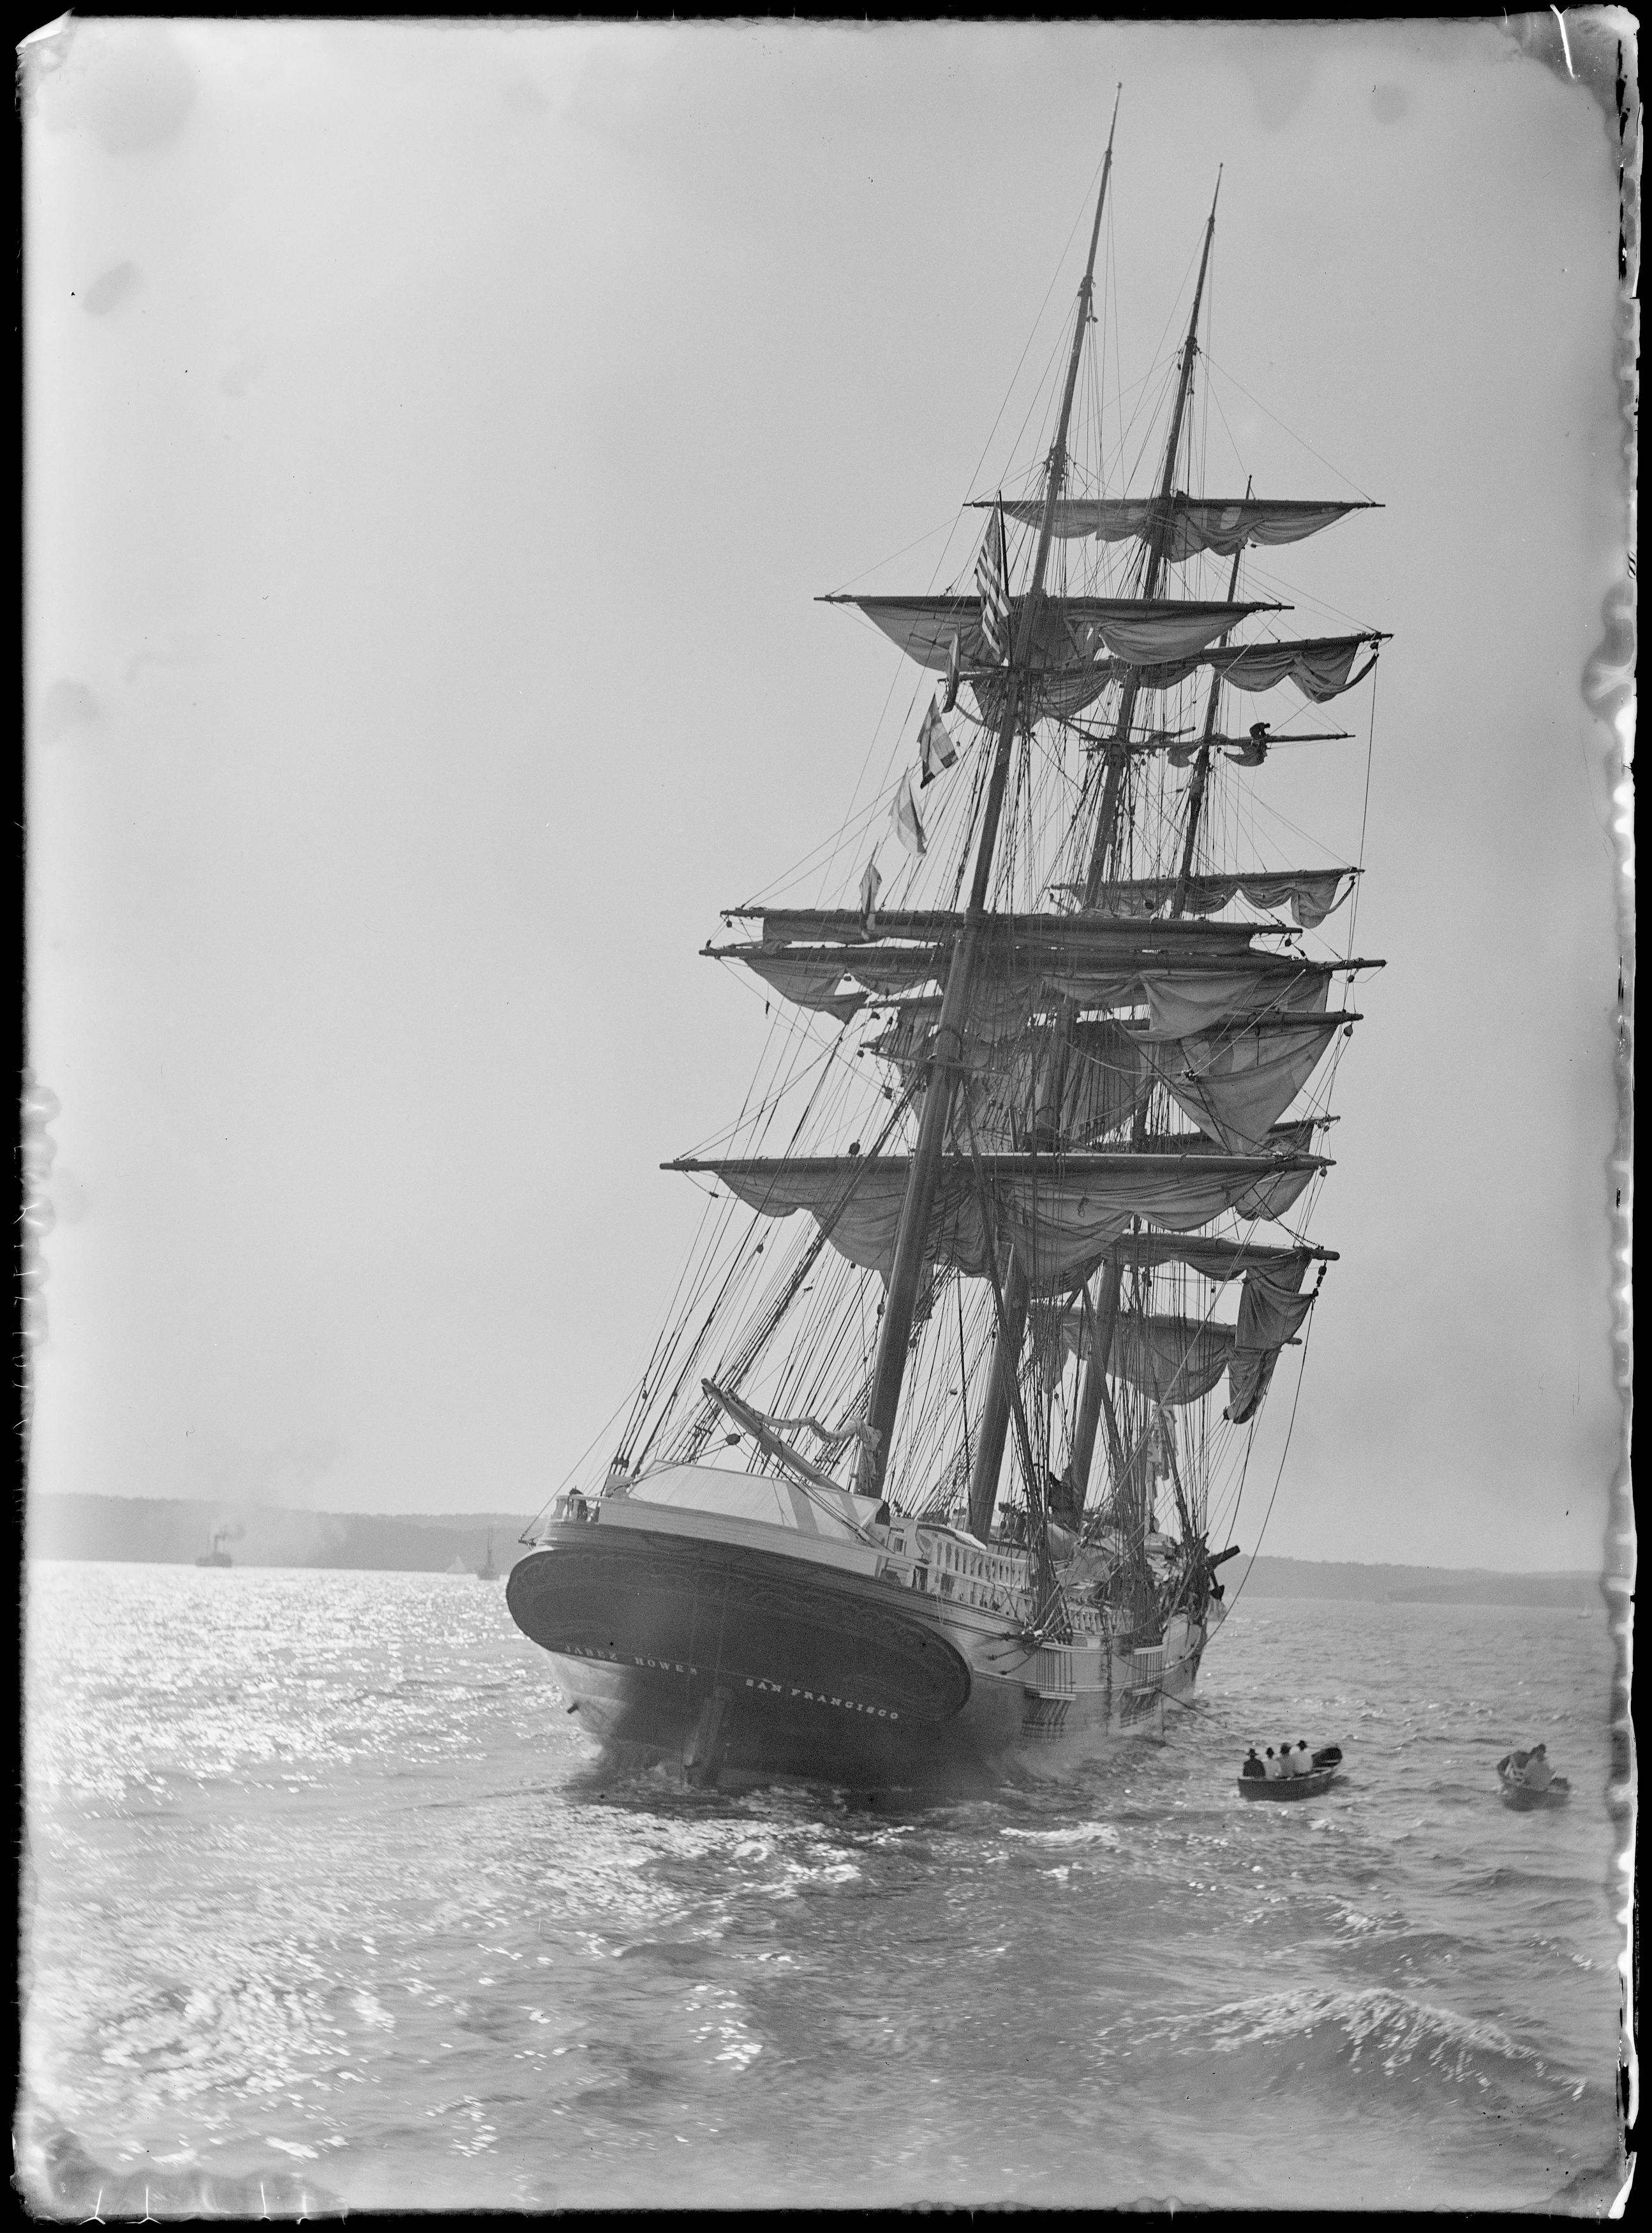 Glass negatives including images of boating, beaches, motoring and houses in the Sydney region, ca 1890-1910, by William Joseph Macpherson